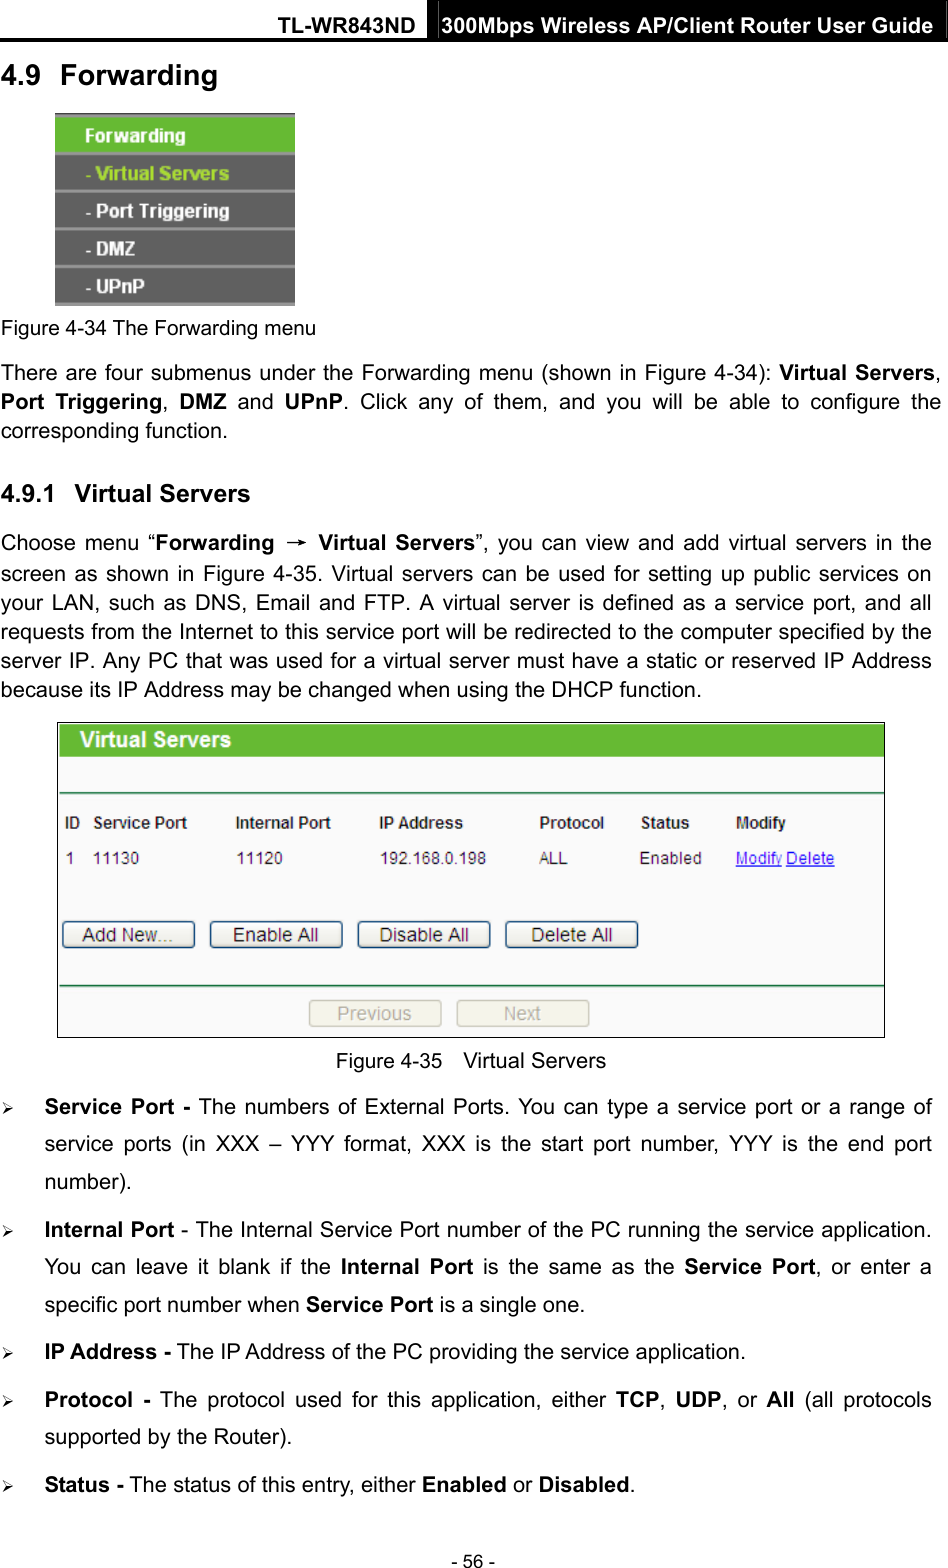 TL-WR843ND 300Mbps Wireless AP/Client Router User Guide - 56 - 4.9  Forwarding     Figure 4-34 The Forwarding menu There are four submenus under the Forwarding menu (shown in Figure 4-34): Virtual Servers, Port Triggering,  DMZ and UPnP. Click any of them, and you will be able to configure the corresponding function. 4.9.1  Virtual Servers Choose menu “Forwarding  → Virtual Servers”, you can view and add virtual servers in the screen as shown in Figure 4-35. Virtual servers can be used for setting up public services on your LAN, such as DNS, Email and FTP. A virtual server is defined as a service port, and all requests from the Internet to this service port will be redirected to the computer specified by the server IP. Any PC that was used for a virtual server must have a static or reserved IP Address because its IP Address may be changed when using the DHCP function.    Figure 4-35    Virtual Servers  Service Port - The numbers of External Ports. You can type a service port or a range of service ports (in XXX – YYY format, XXX is the start port number, YYY is the end port number).   Internal Port - The Internal Service Port number of the PC running the service application. You can leave it blank if the Internal Port is the same as the Service Port, or enter a specific port number when Service Port is a single one.  IP Address - The IP Address of the PC providing the service application.  Protocol - The protocol used for this application, either TCP,  UDP, or All  (all protocols supported by the Router).  Status - The status of this entry, either Enabled or Disabled. 